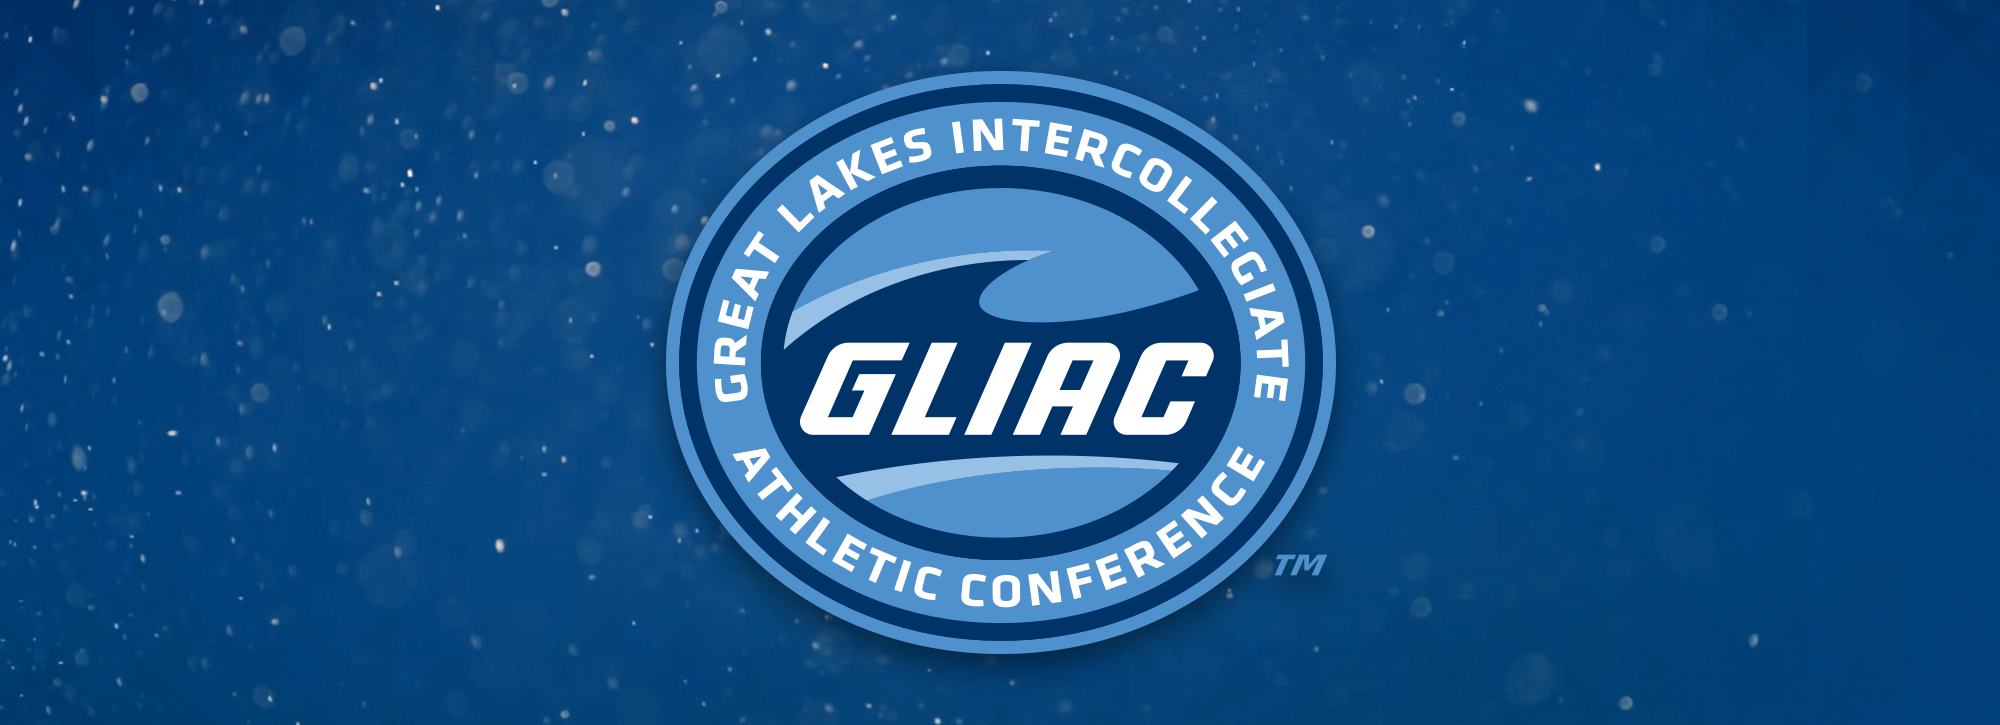 GLIAC Cancels All Activities Through May 31st